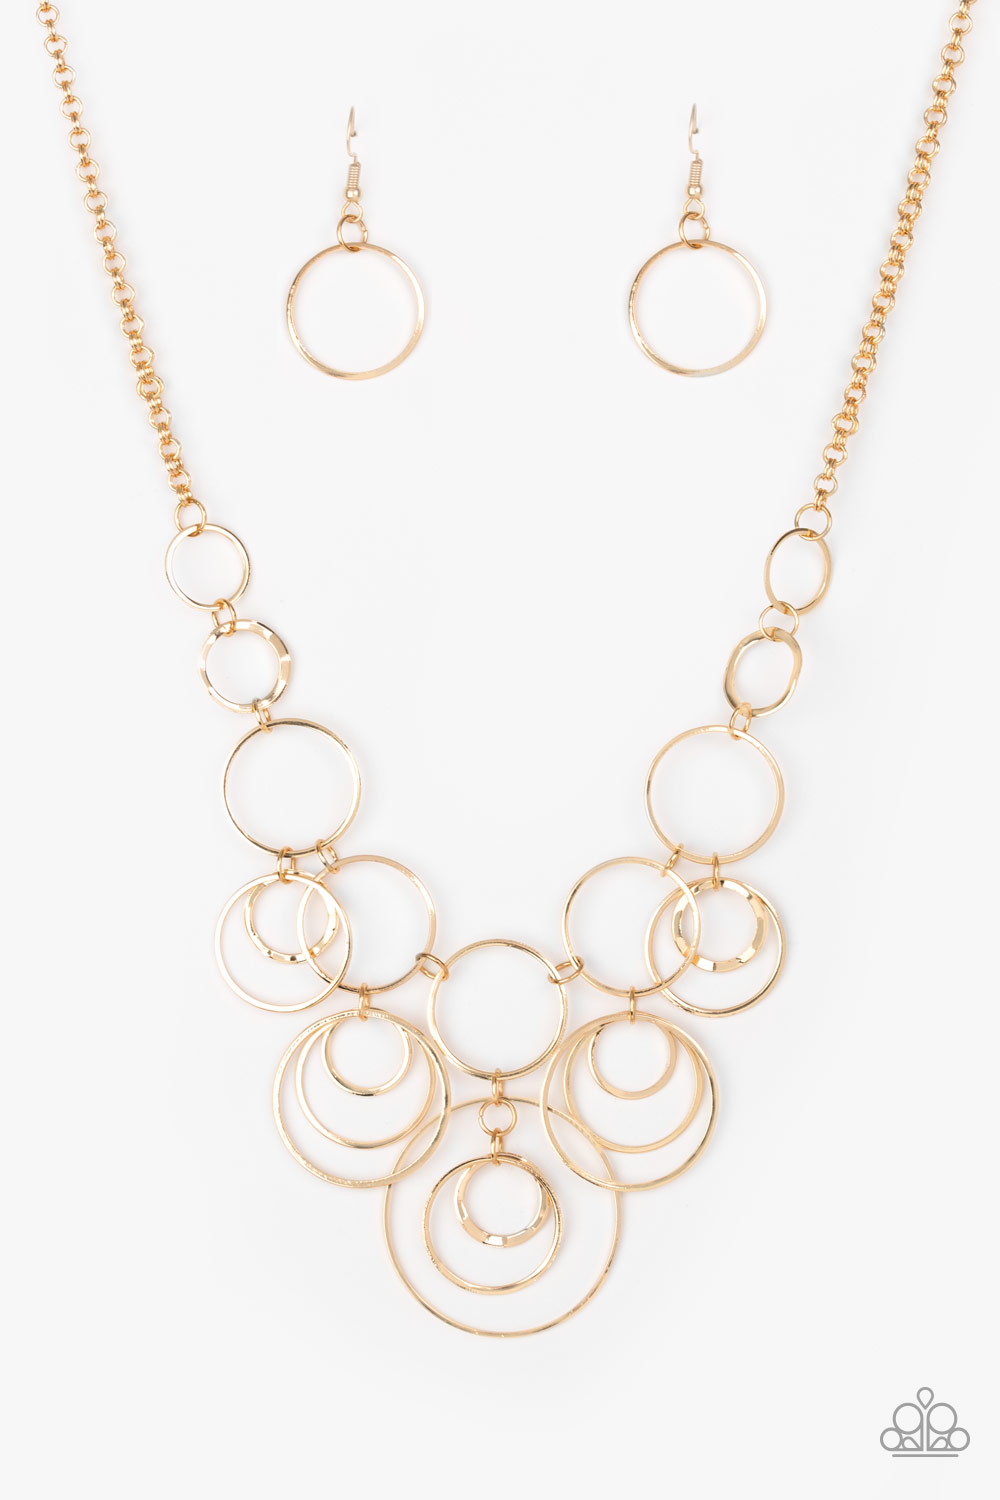 Necklace - Break The Cycle - Gold